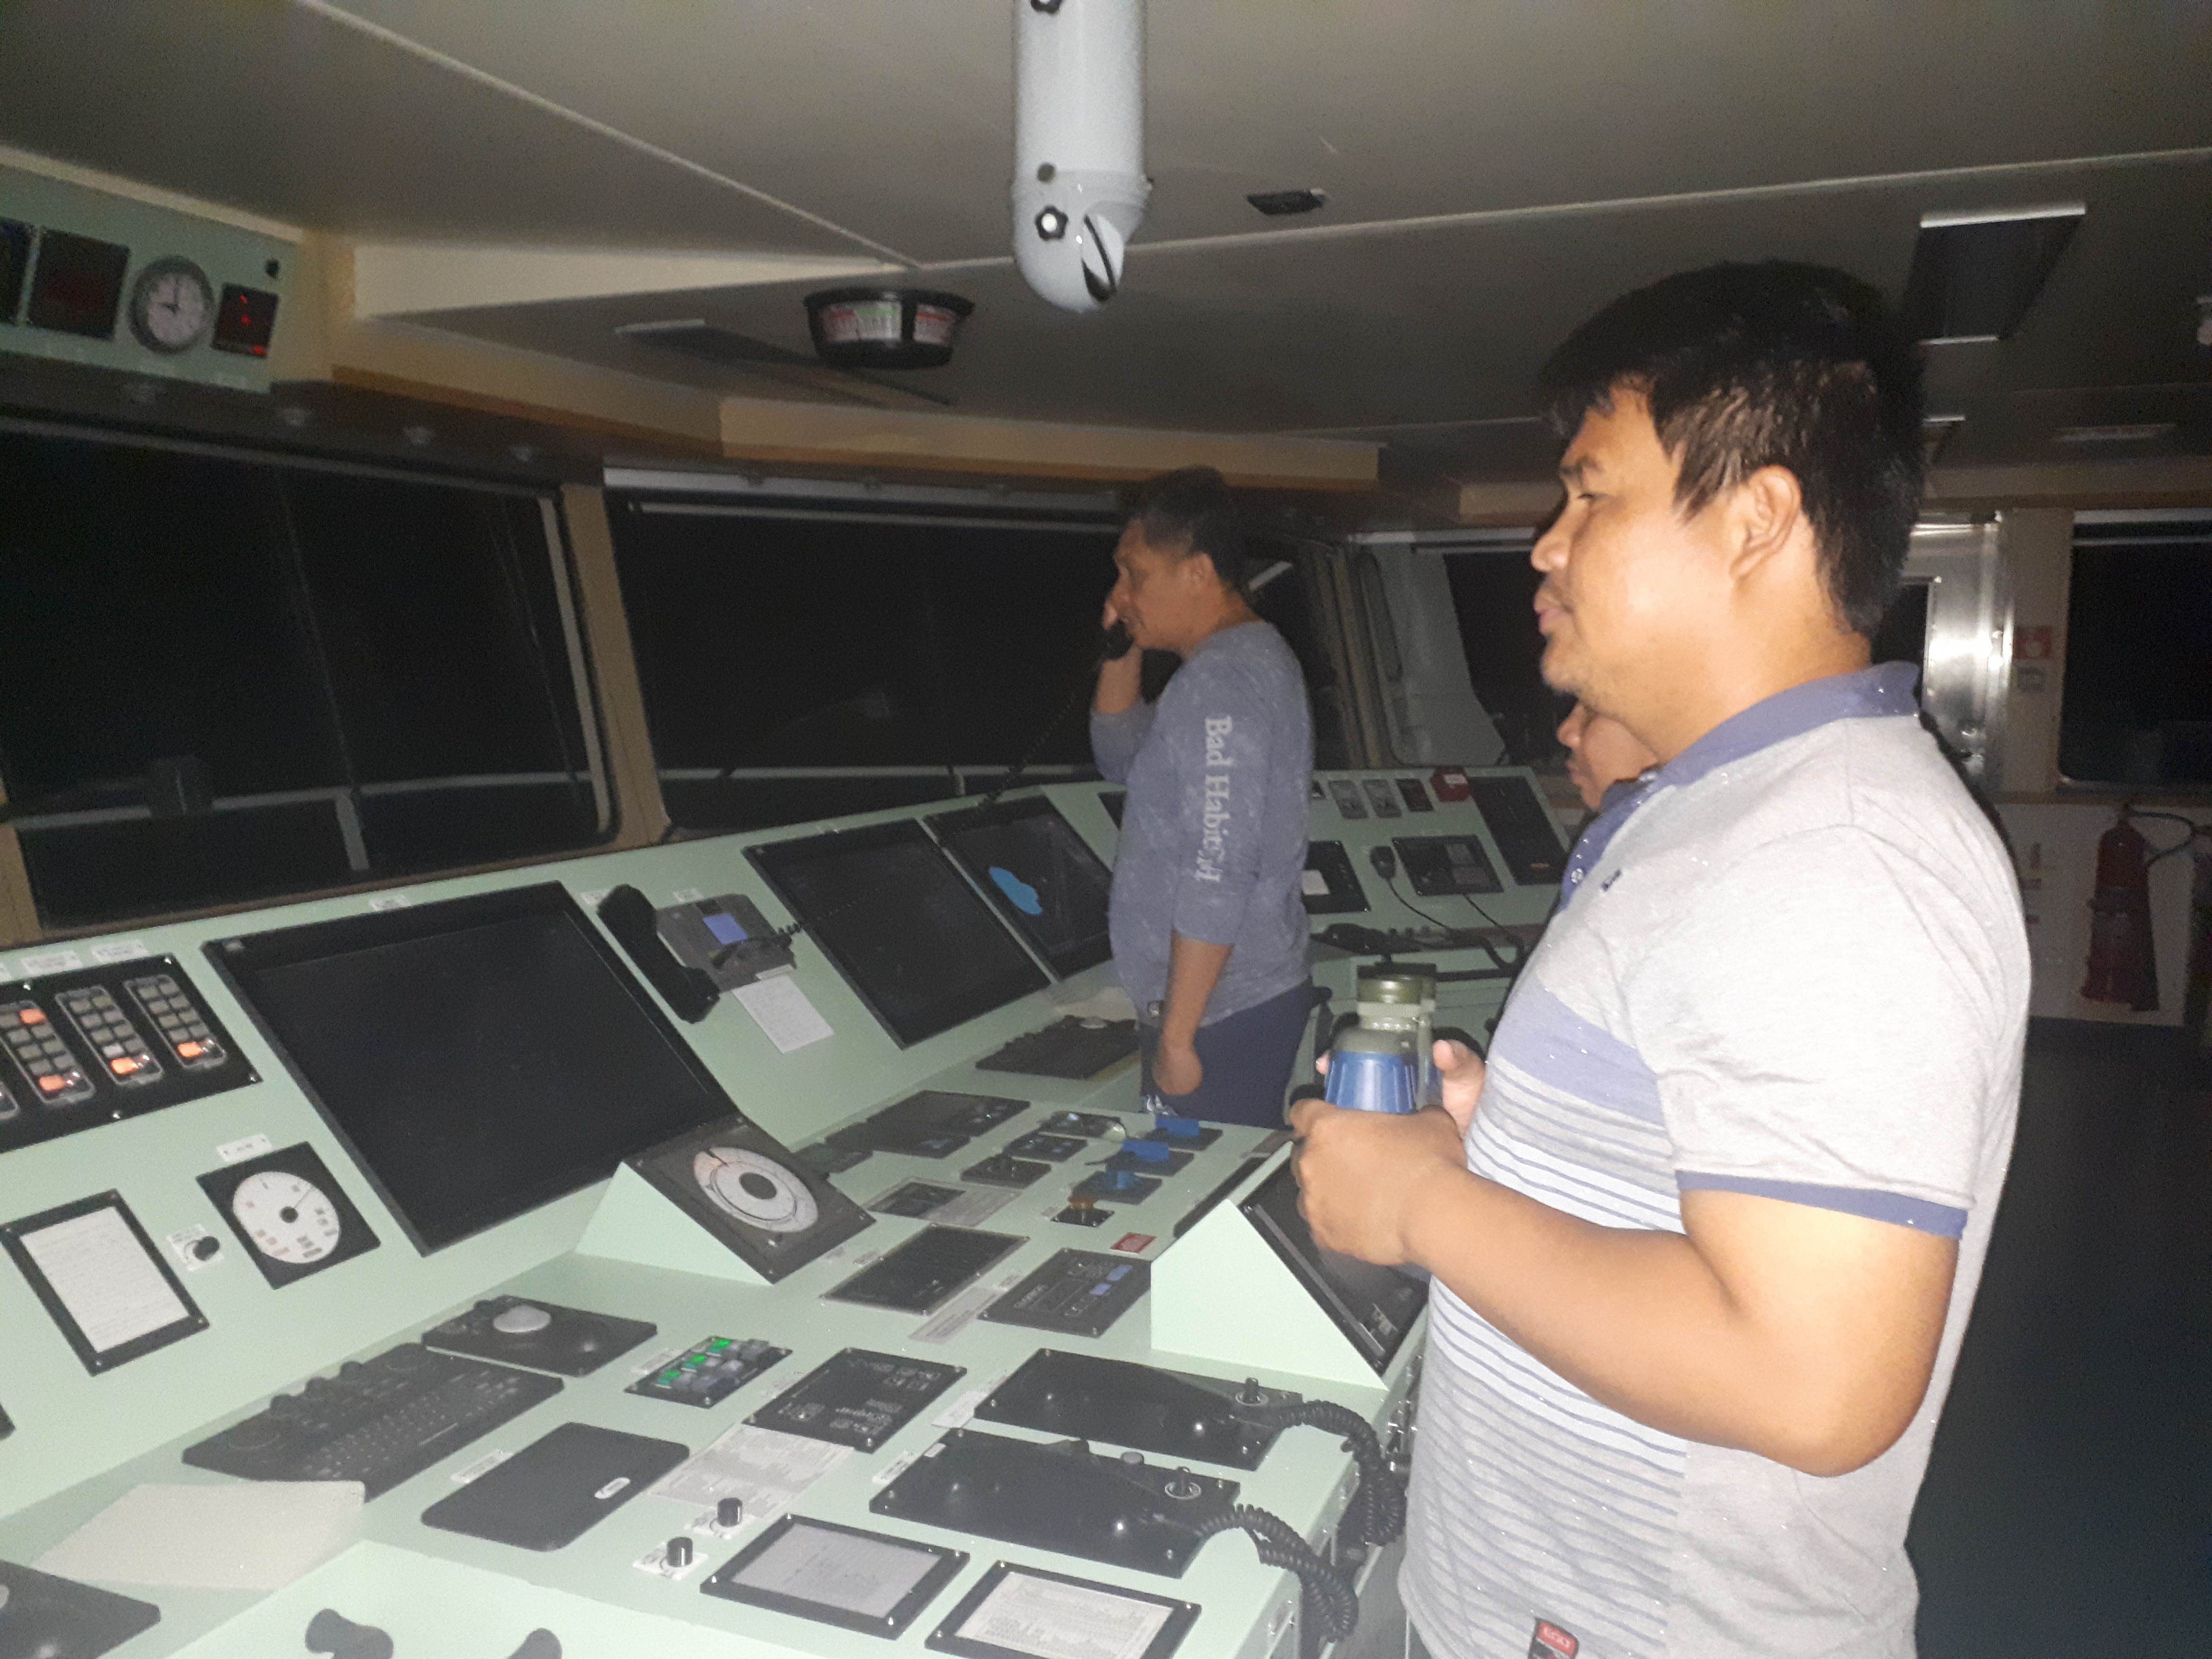 FILIPINO CREW. Ship captain Manolo Ebora (left) speaks to the crew of a 'Chinese warship' on the radio as his crew of fellow Filipinos steer the international oil tanker Green Aura near Scarborough Shoal in the West Philippine Sea on September 30, 2019. Photo courtesy of Captain Manolo Ebora